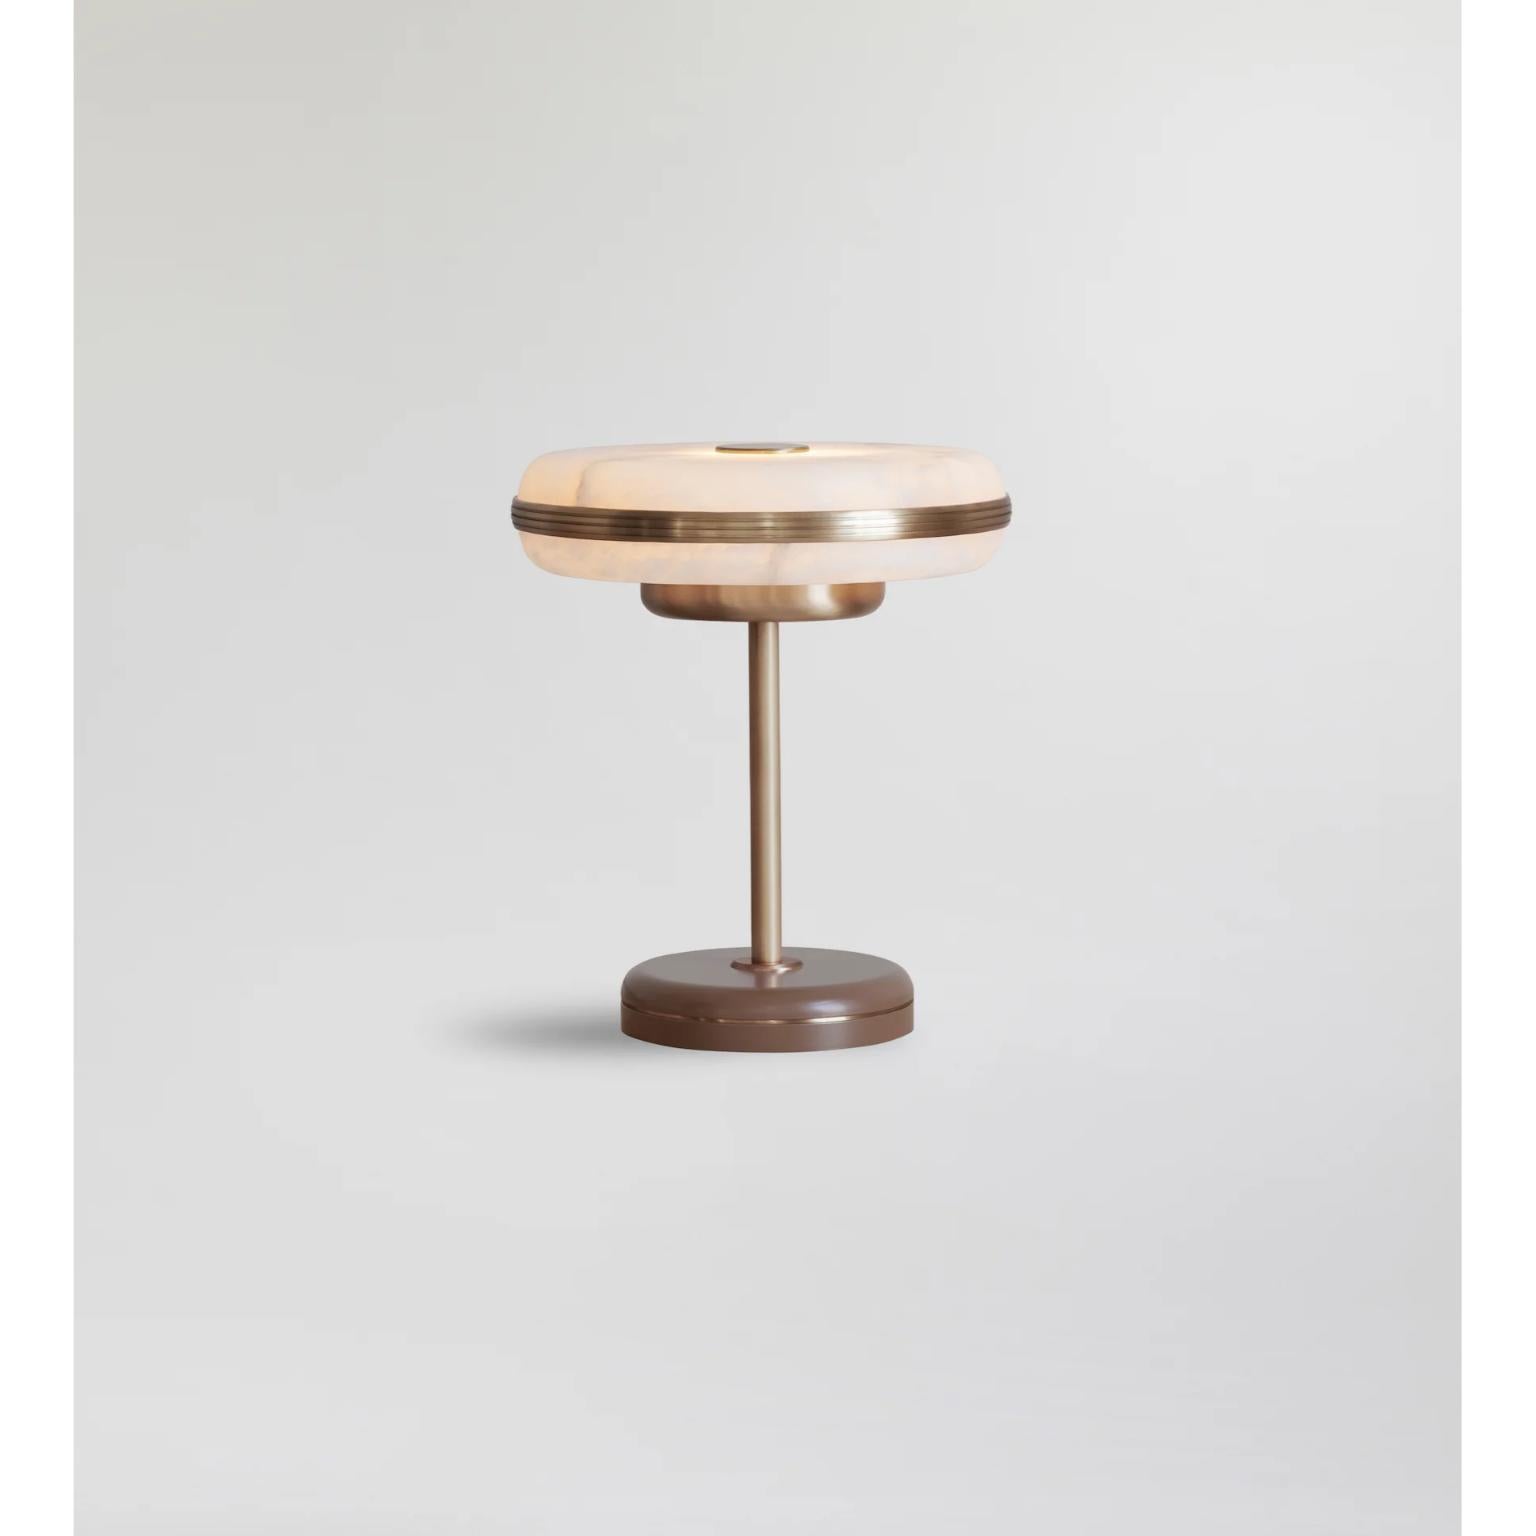 Beran Antique Brass Small Table Lamp by Bert Frank
Dimensions: Ø 26 x H 28 cm.
Materials: Brass and alabaster.
Base finish: Hazel.

Available in two different sizes. Available in different finishes and materials. Please contact us. 

The natural